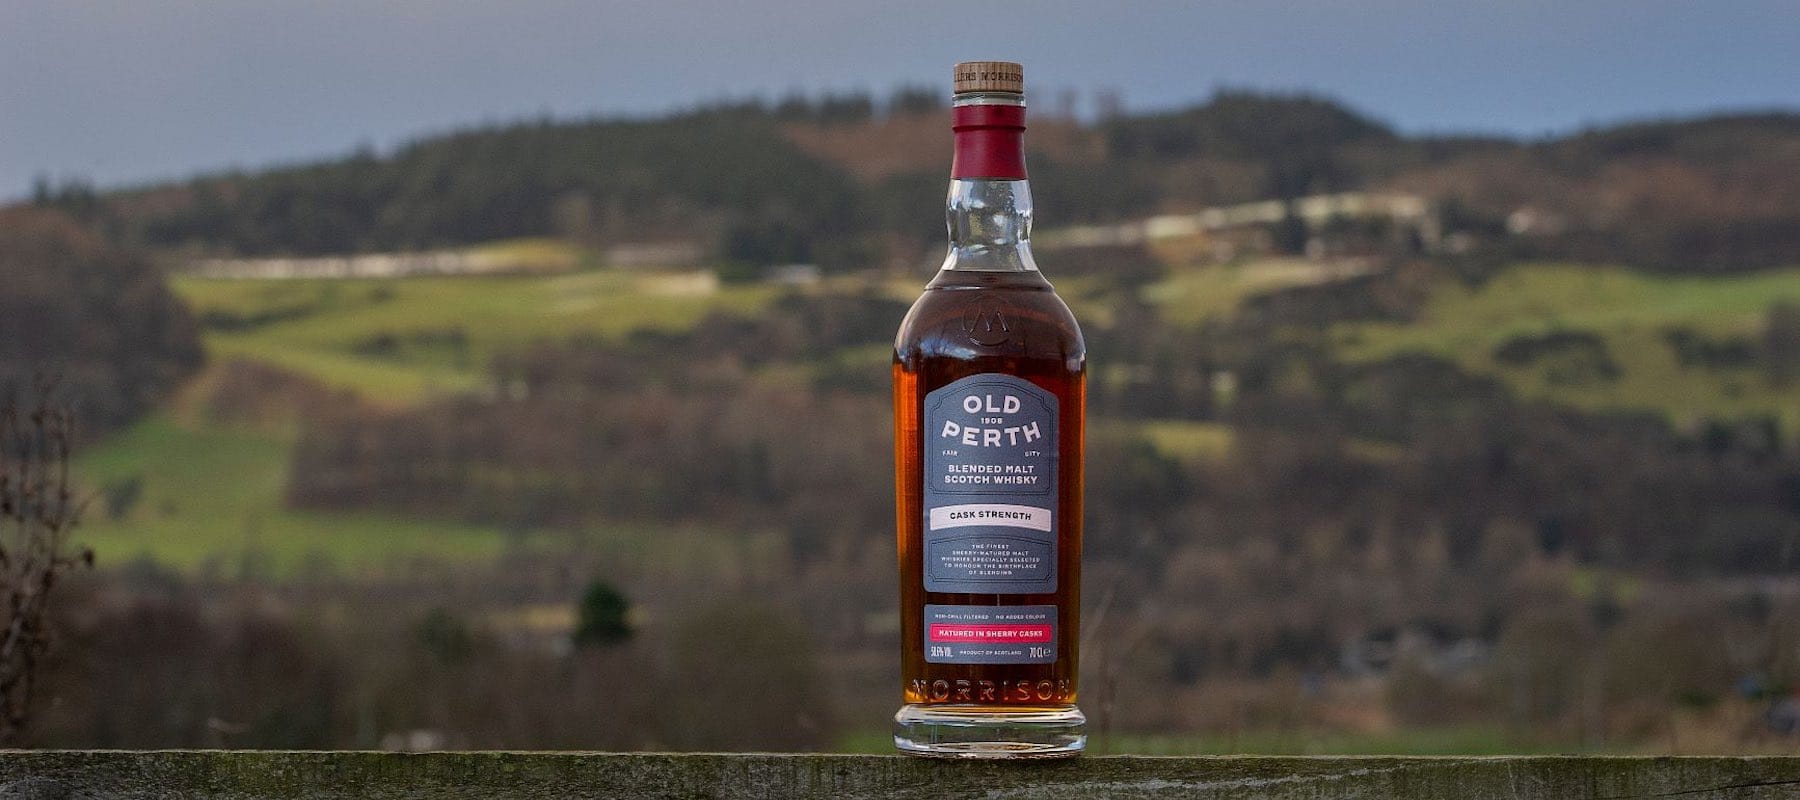 Whisky Under £50 Review 10: Old Perth Cask Strength